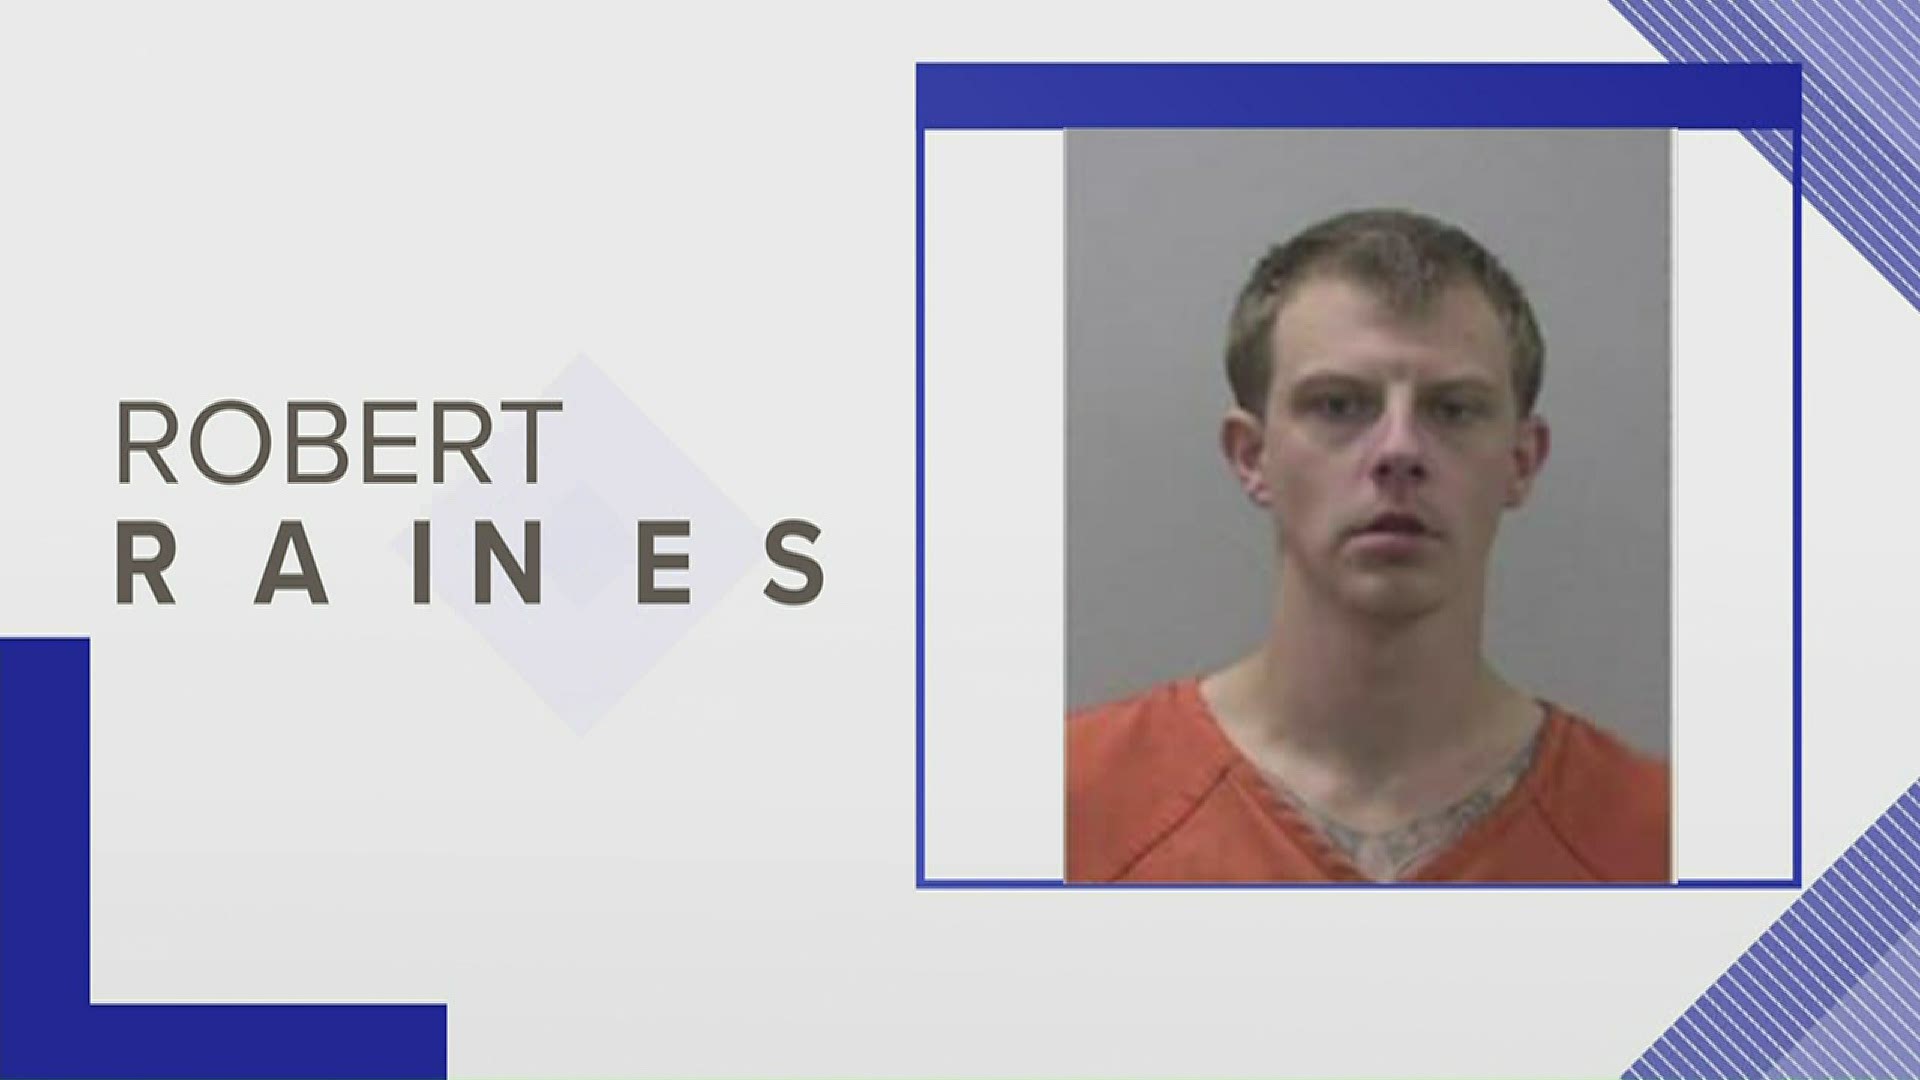 Robert Lee Raines is wanted on multiple charges, including attempted murder and armed robbery, by the Richland County Sheriff's Department and West Columbia police.